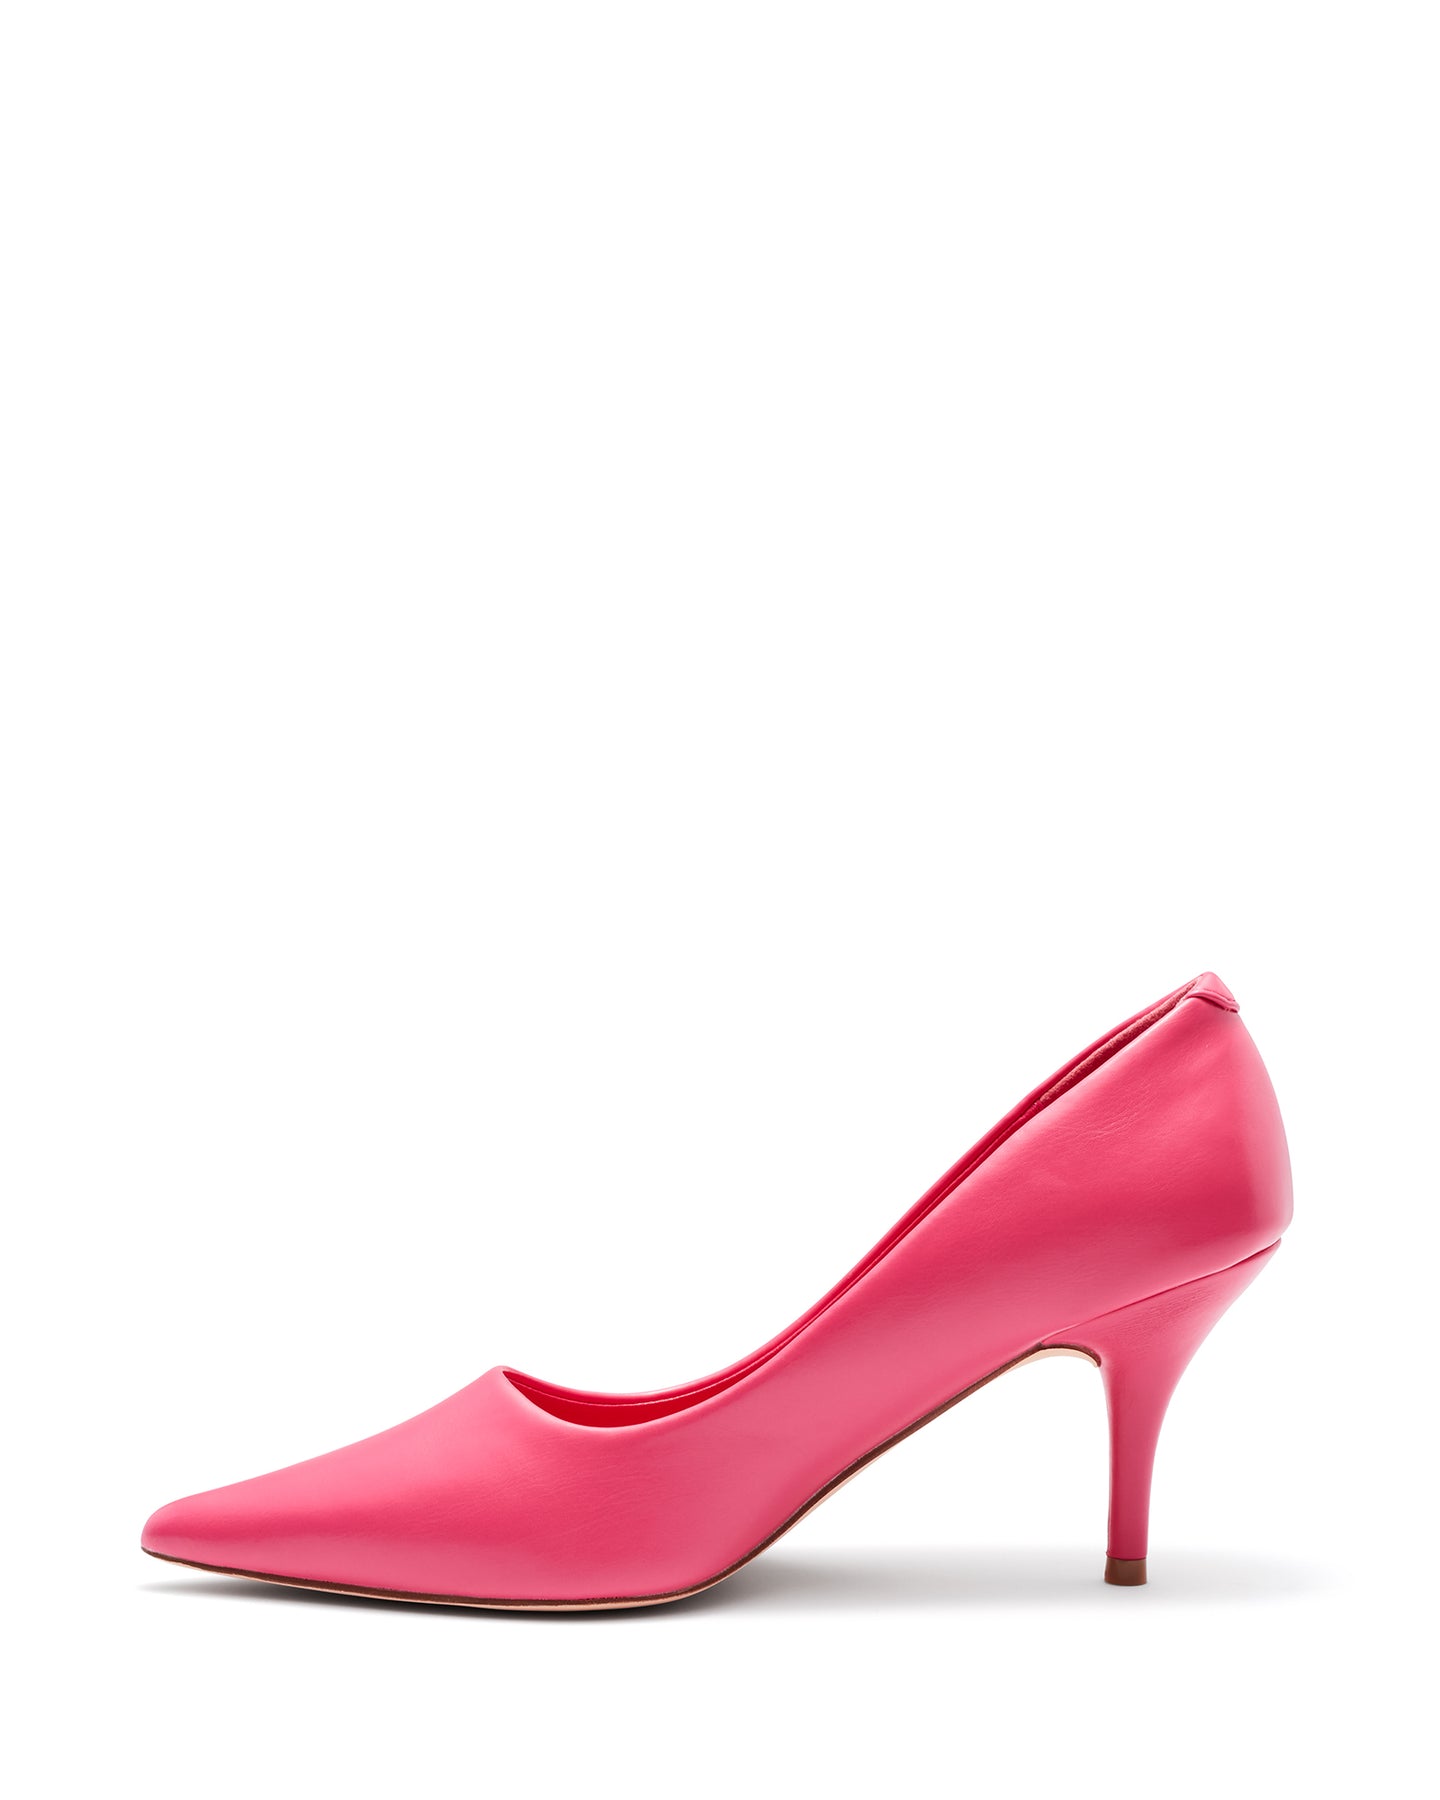 Therapy Shoes Sabrina Cabaret | Women's Heels | Pumps | Office